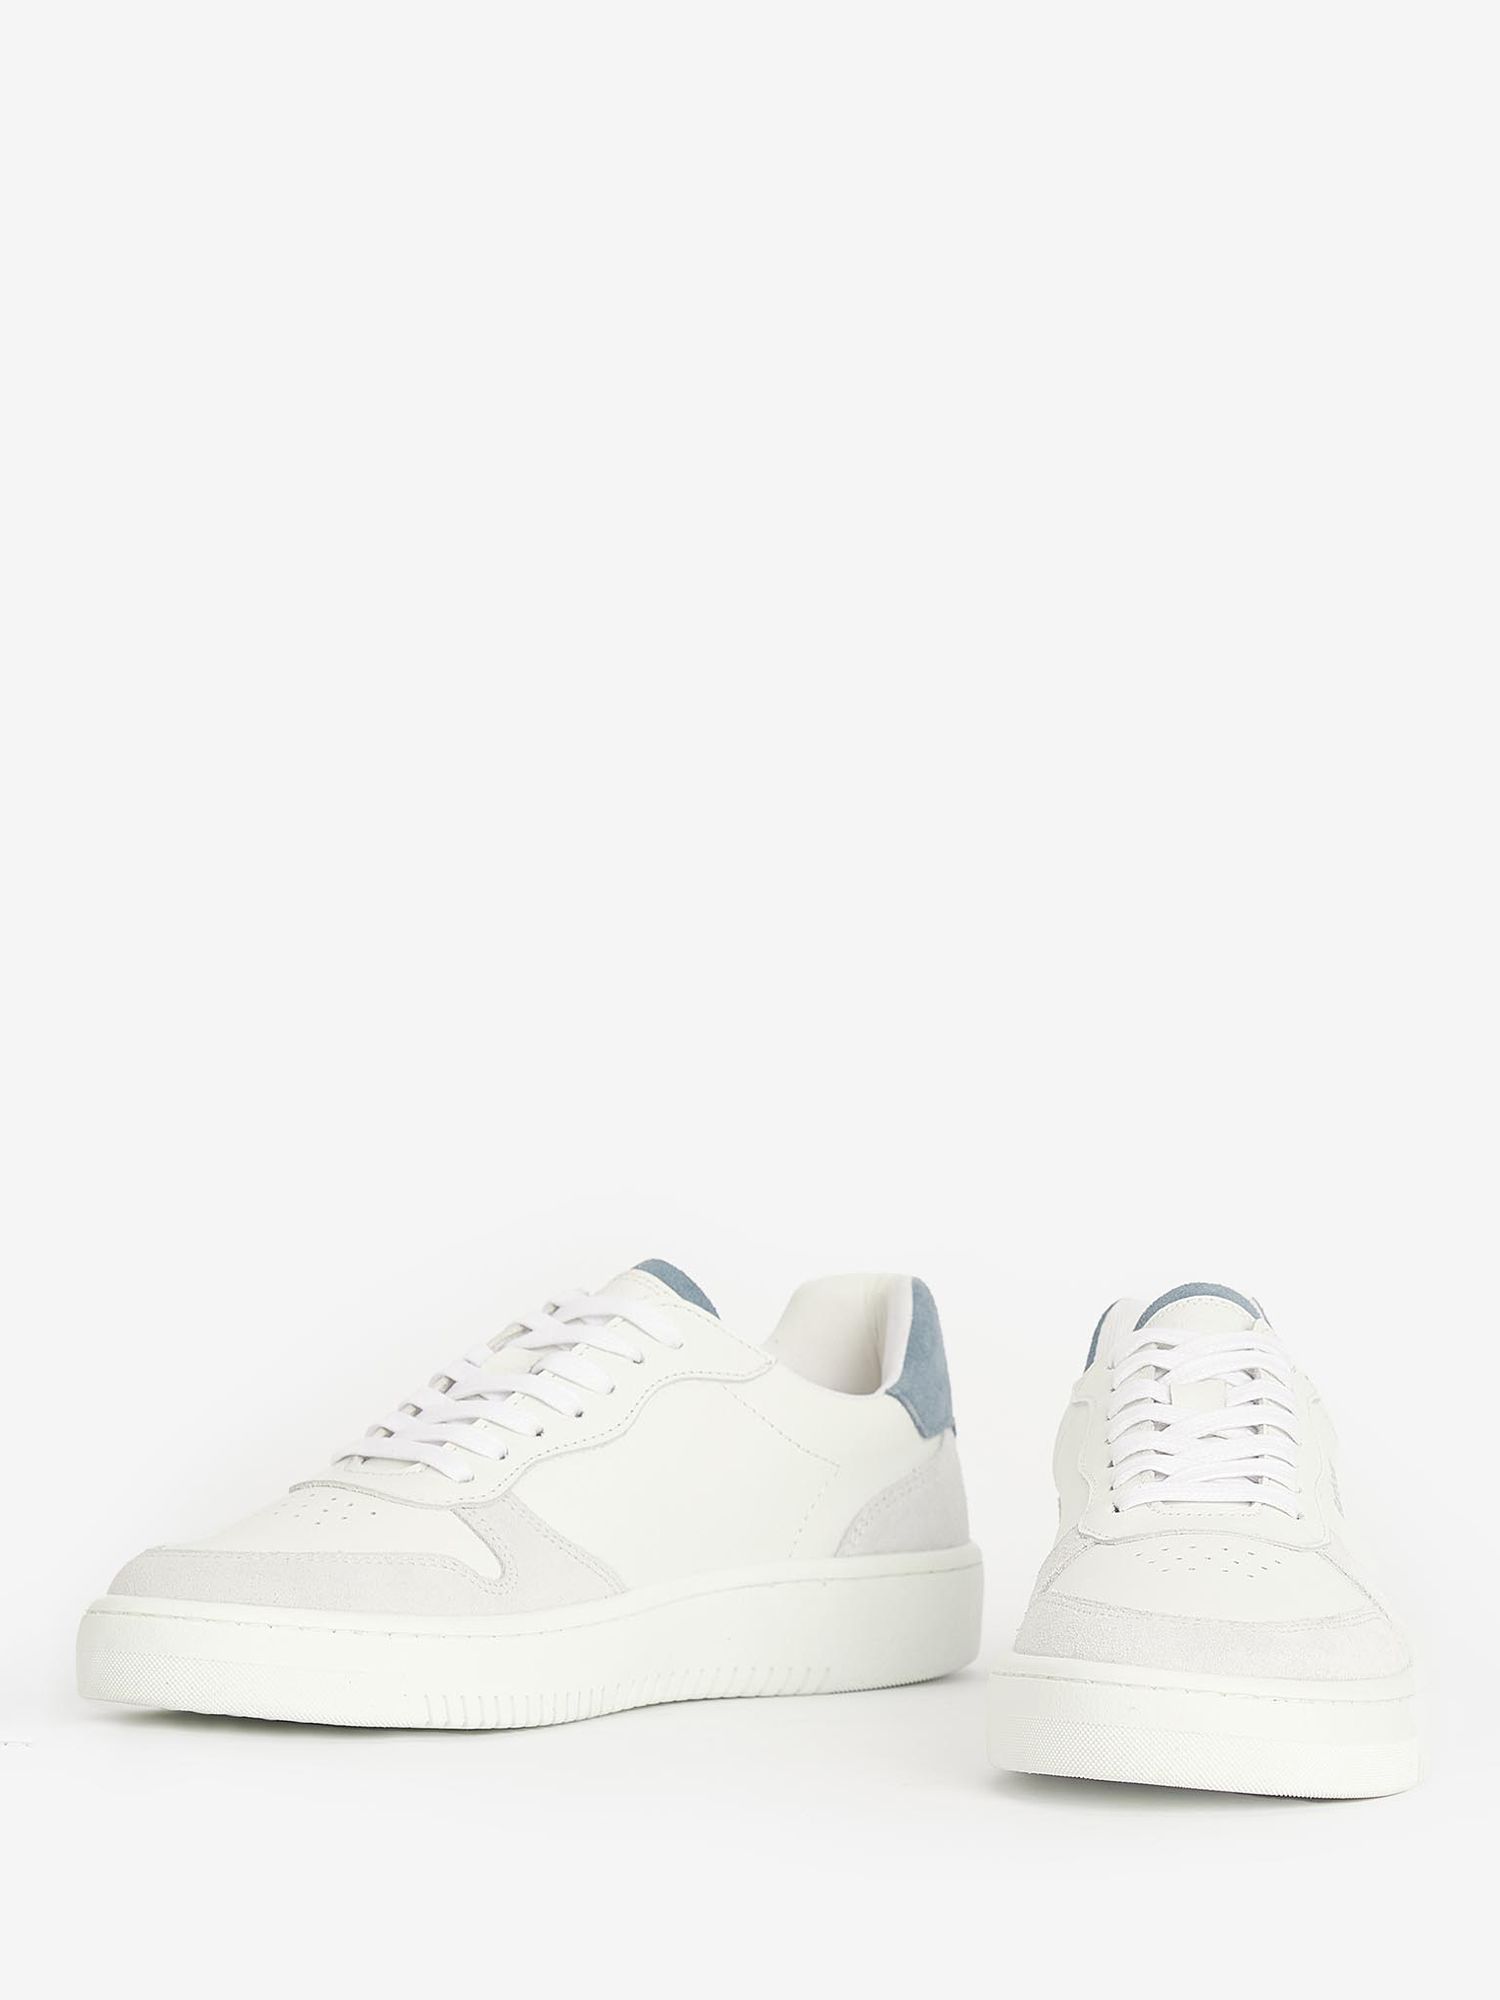 Barbour Celeste Leather and Suede Trainers, White/Chambray at John ...